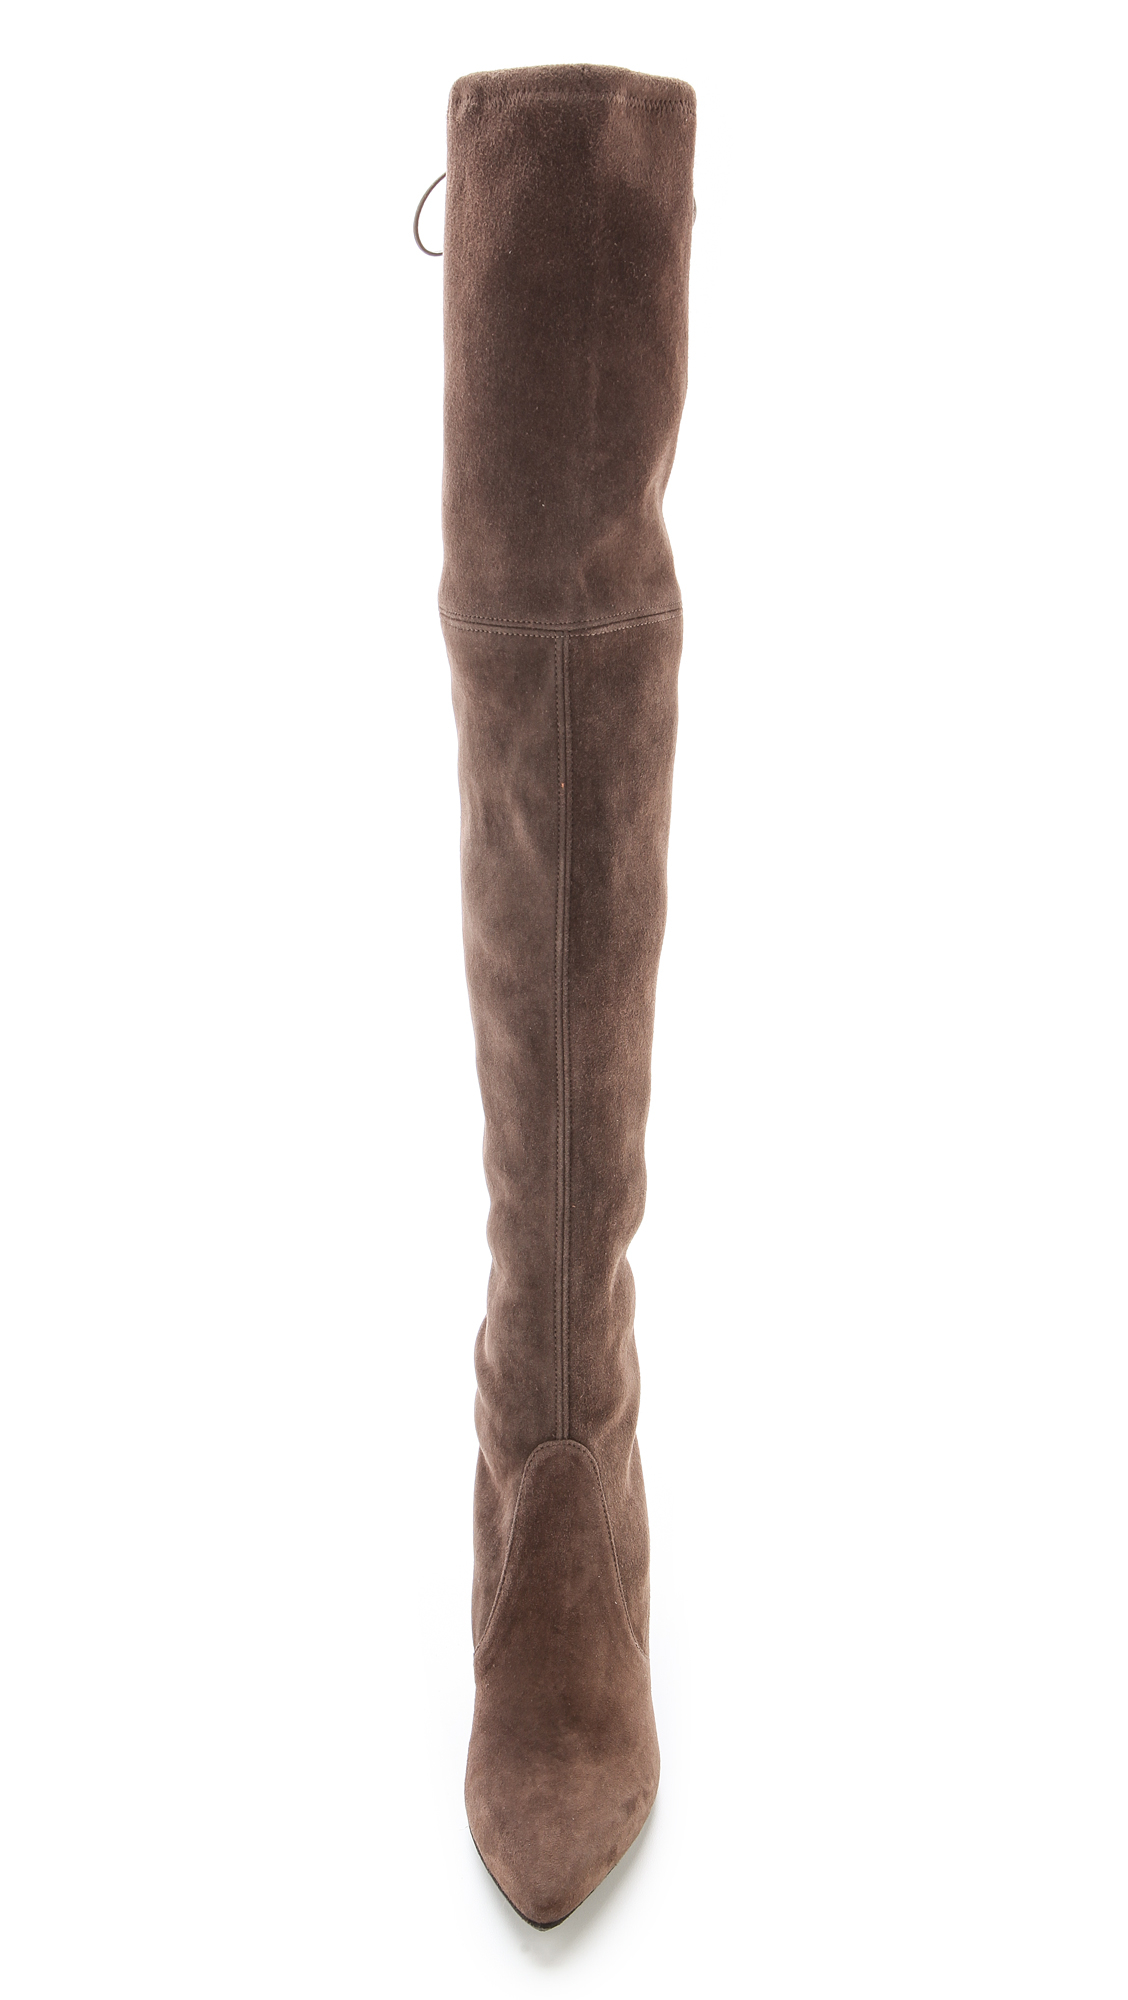 Lyst - Stuart Weitzman High Street Over The Knee Boots - Funghi in Brown